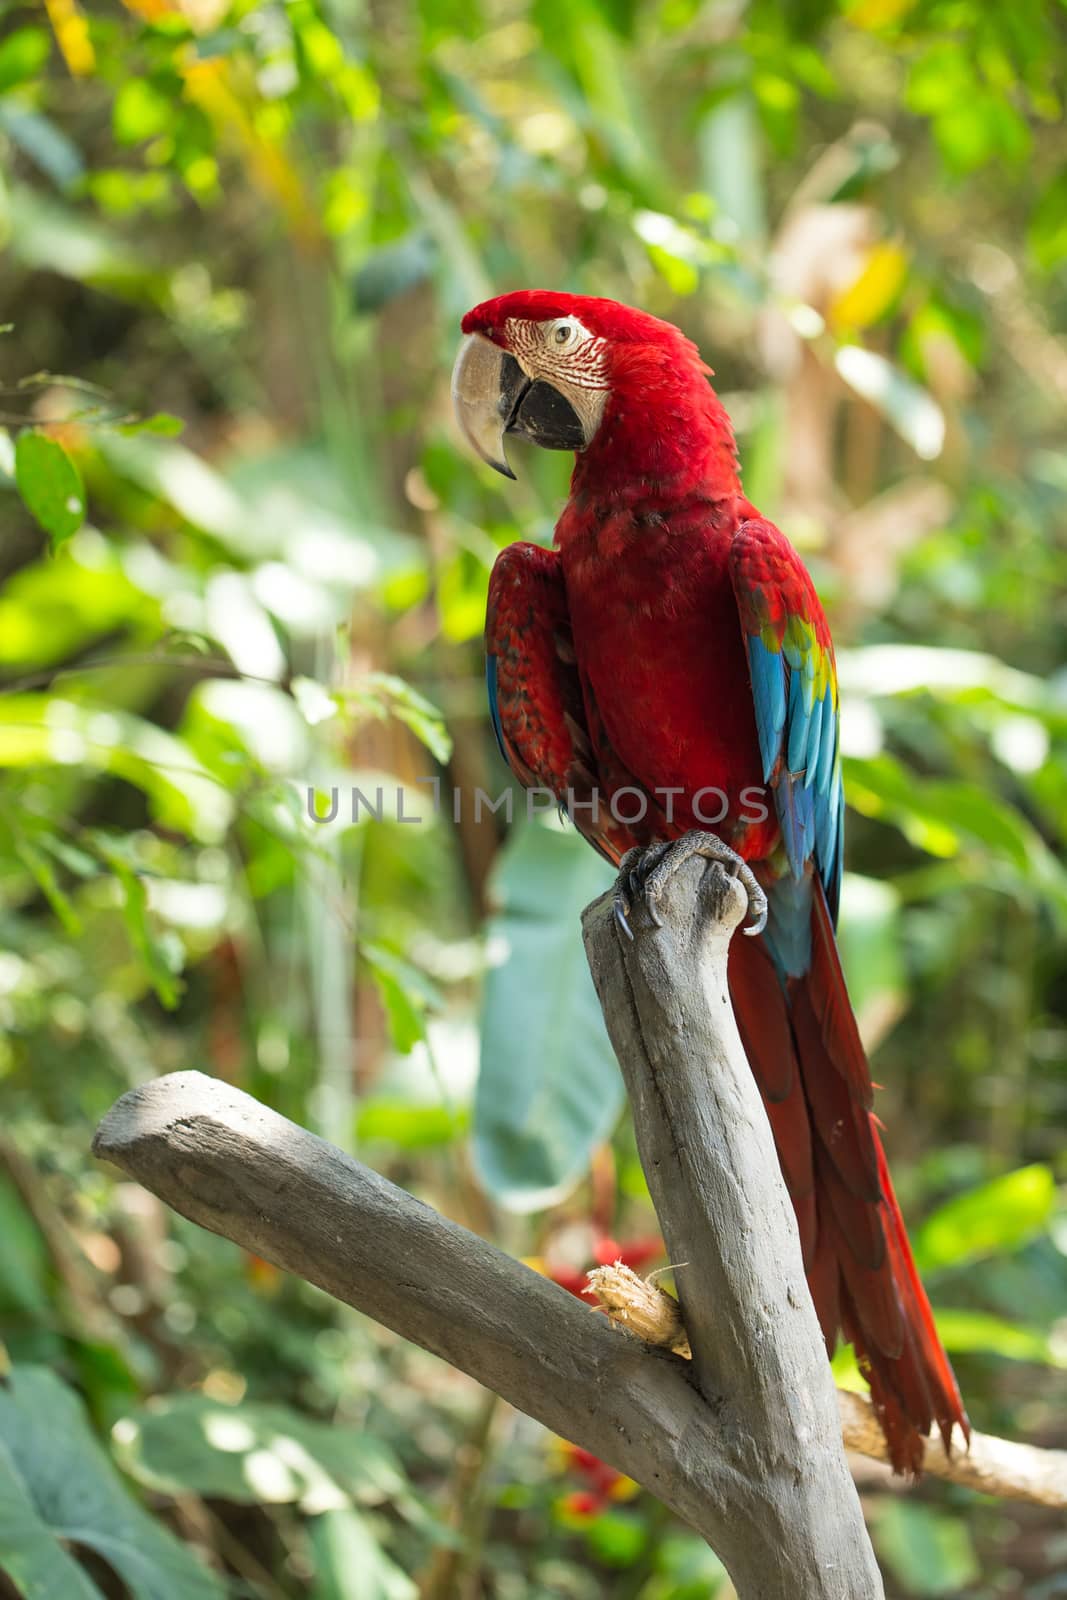 Parrot in Bali Island Indonesia - nature background